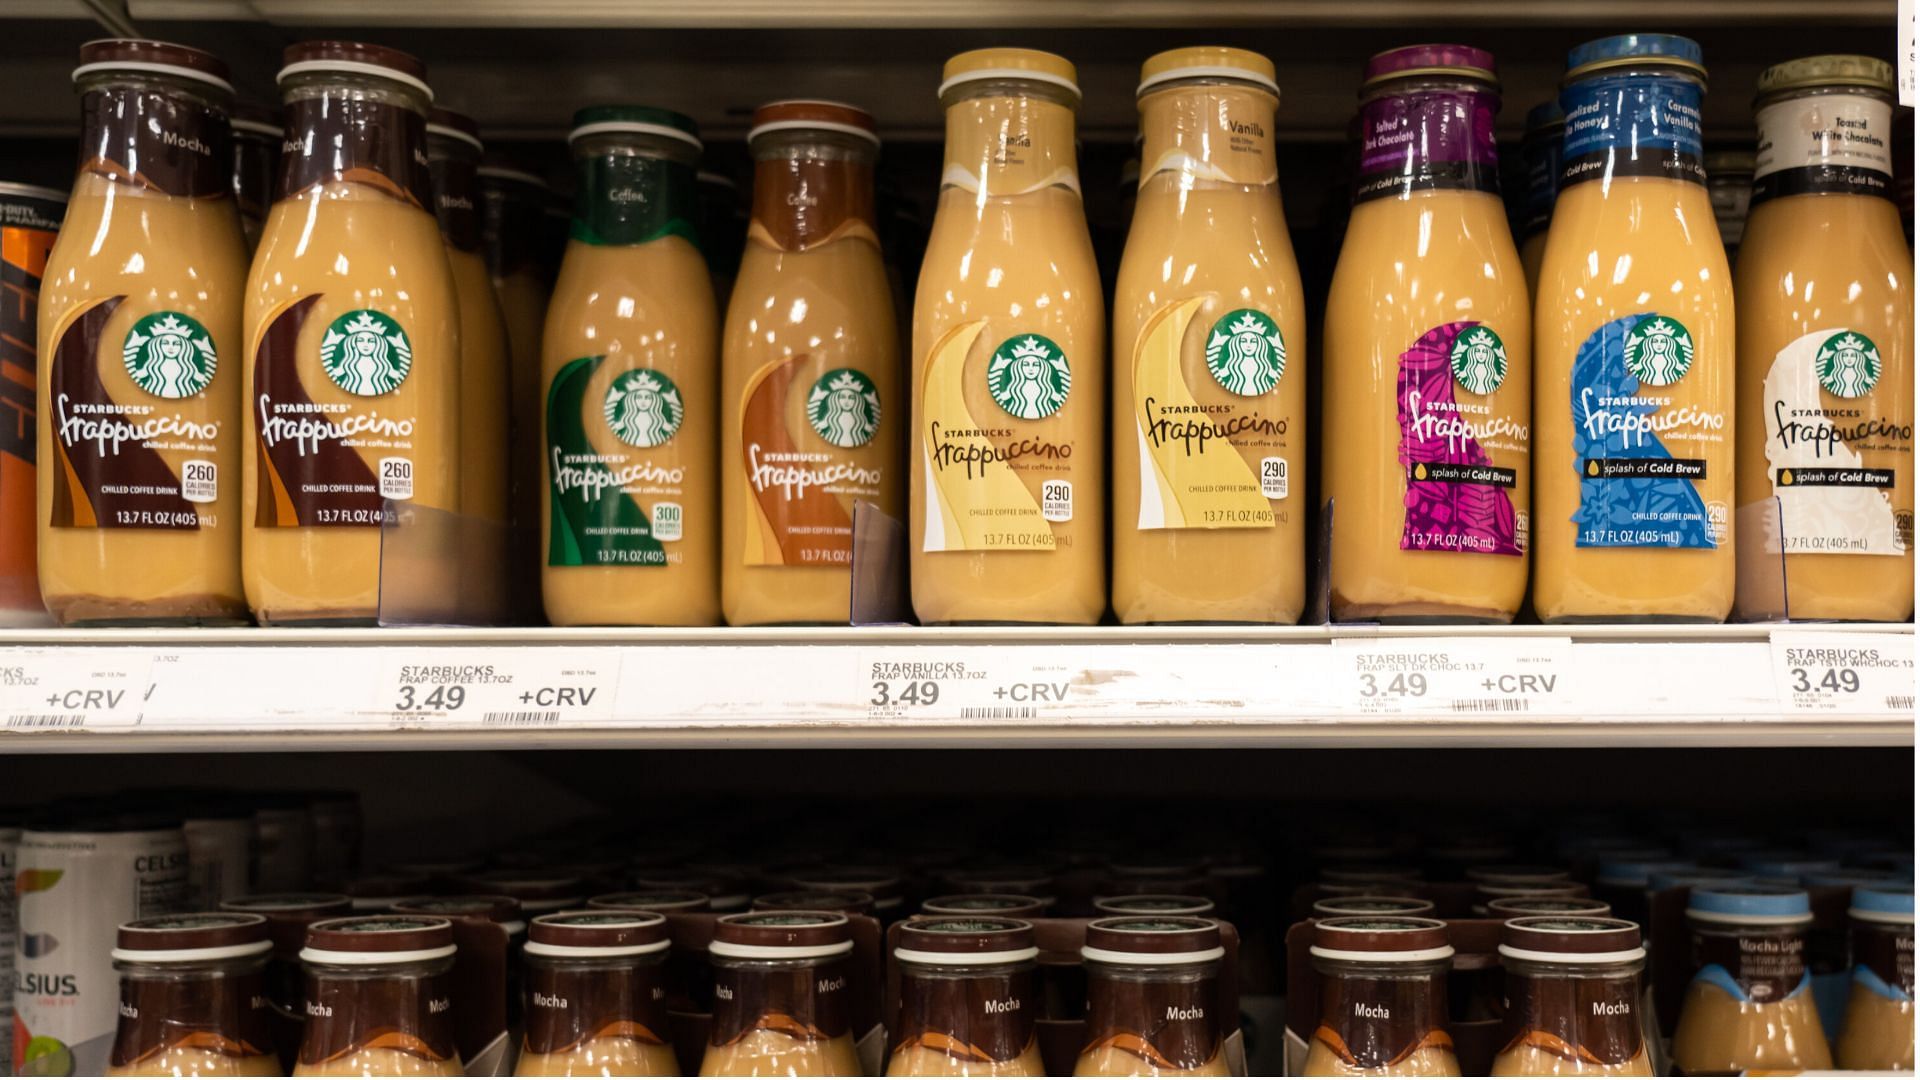 the recalled bottles of the 13.7-ounce Starbucks Vanilla Frappuccino ready-to-drink chilled coffee beverage (Image via Alex Tai/ SOPA Images/ LightRocket/ Getty Images)